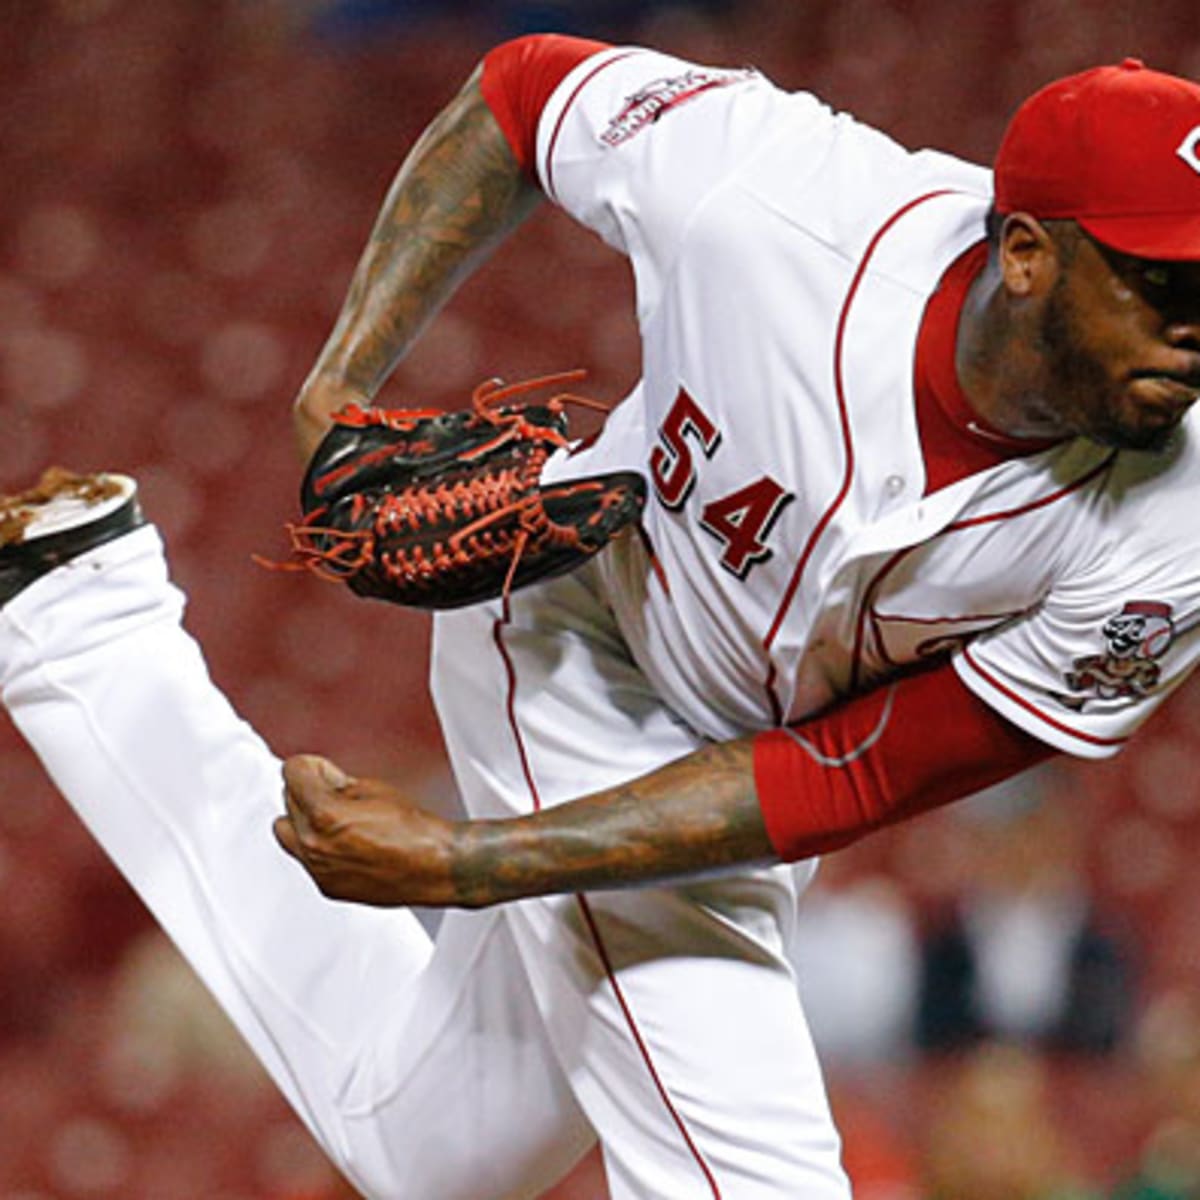 Reds demote last hope from Aroldis Chapman deal with Yankees 